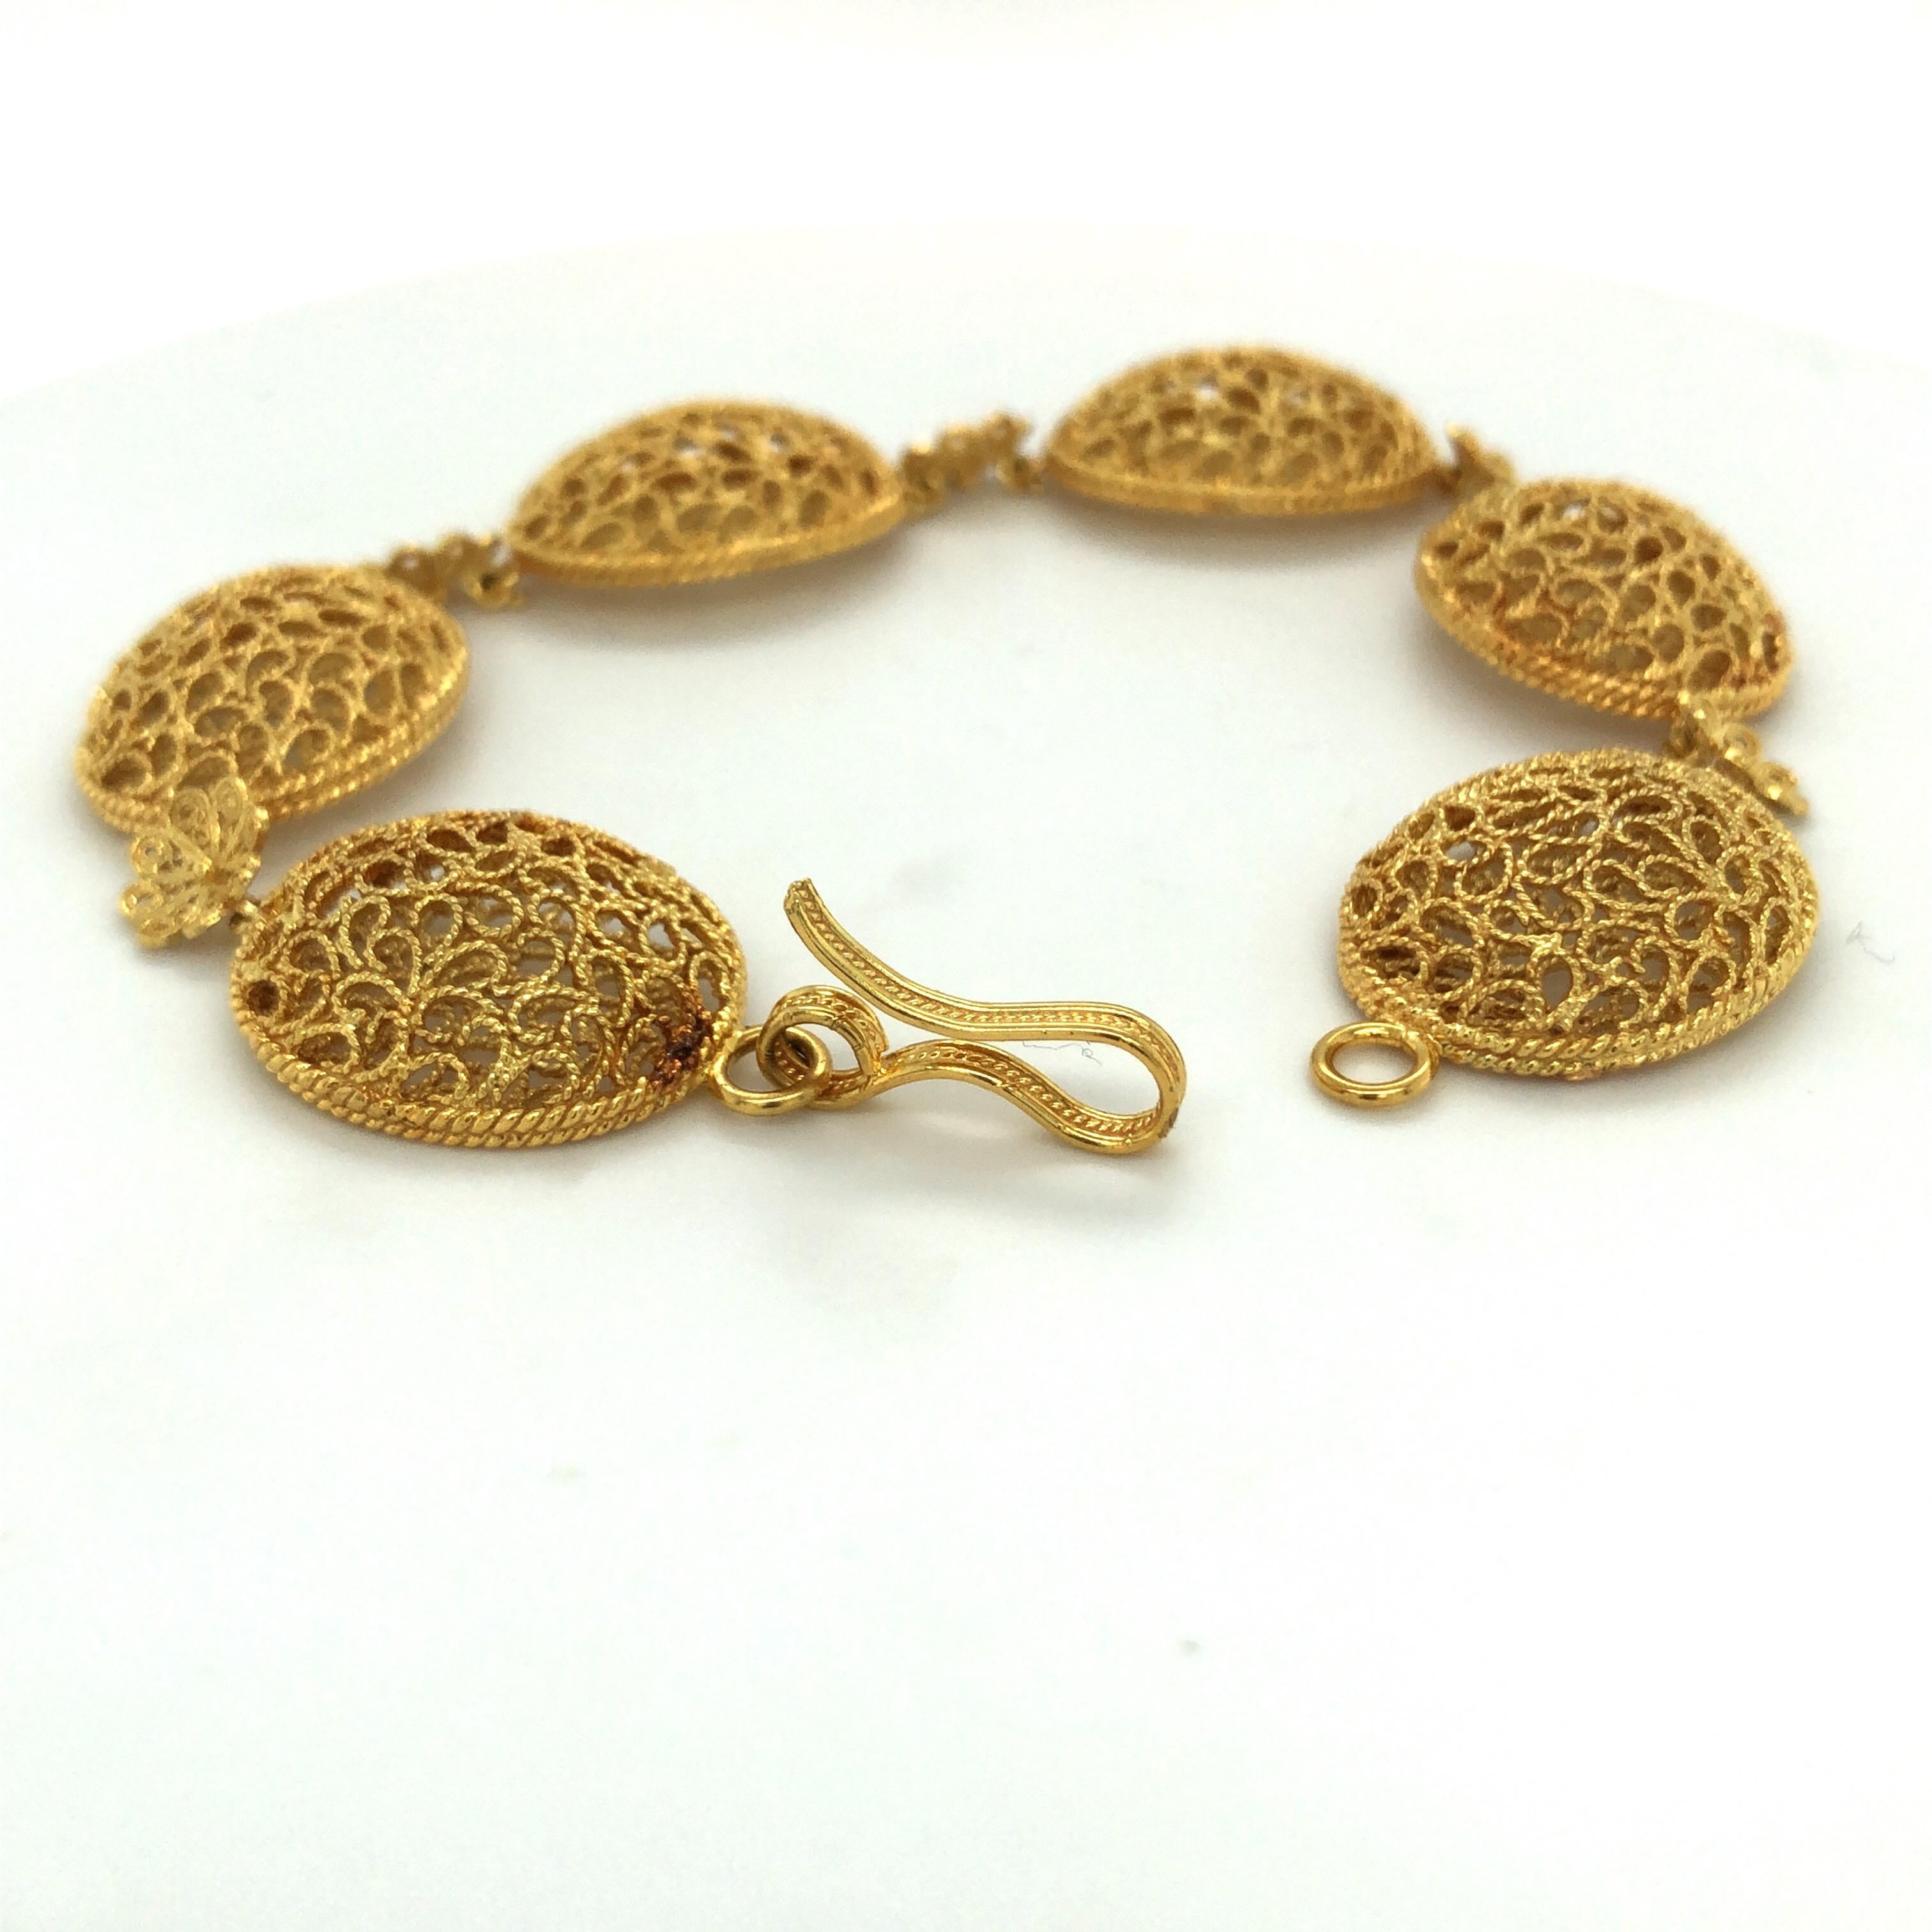 Attractive 18 karat yellow gold bracelet from the Filidoro collection of the Italian brand Buccellati. 
The bracelet is designed as six openwork oval motifs interspaced by delicate filigree flowers, secured by a hook clasp. 
It is light, comfortable